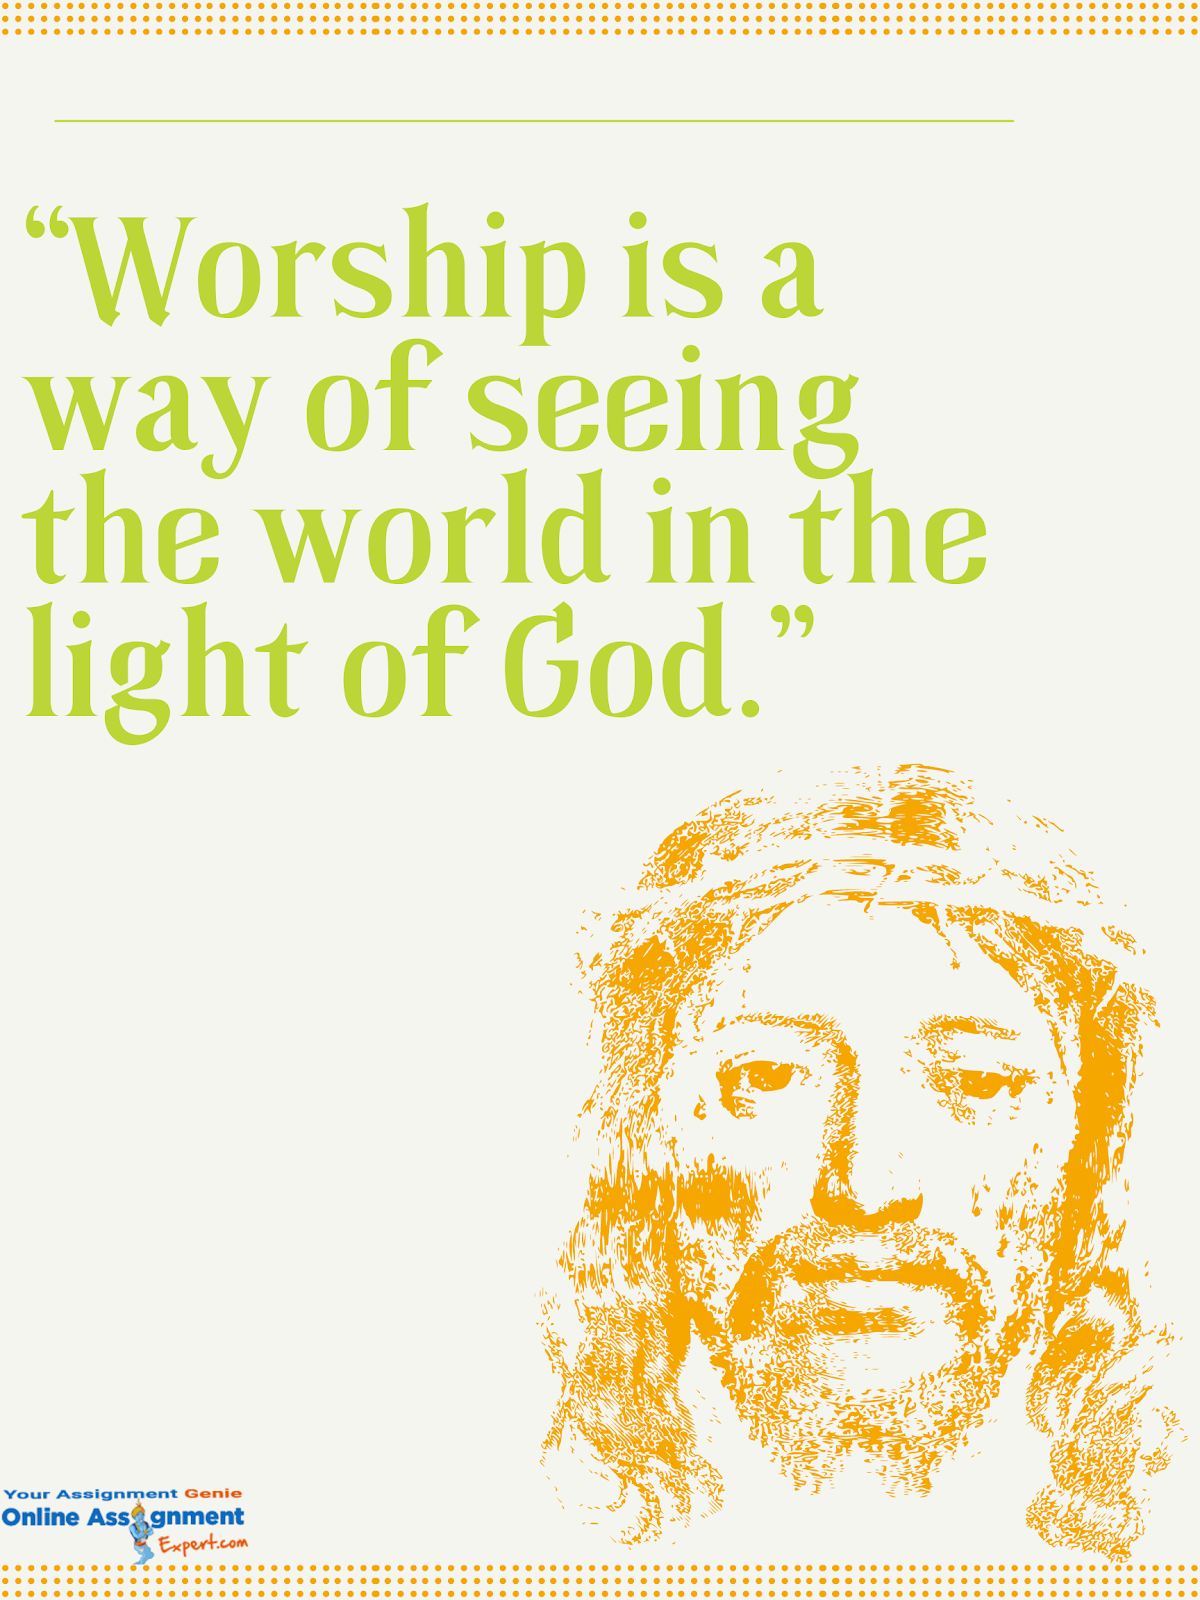 worship is a way of seeing the world in the light of god